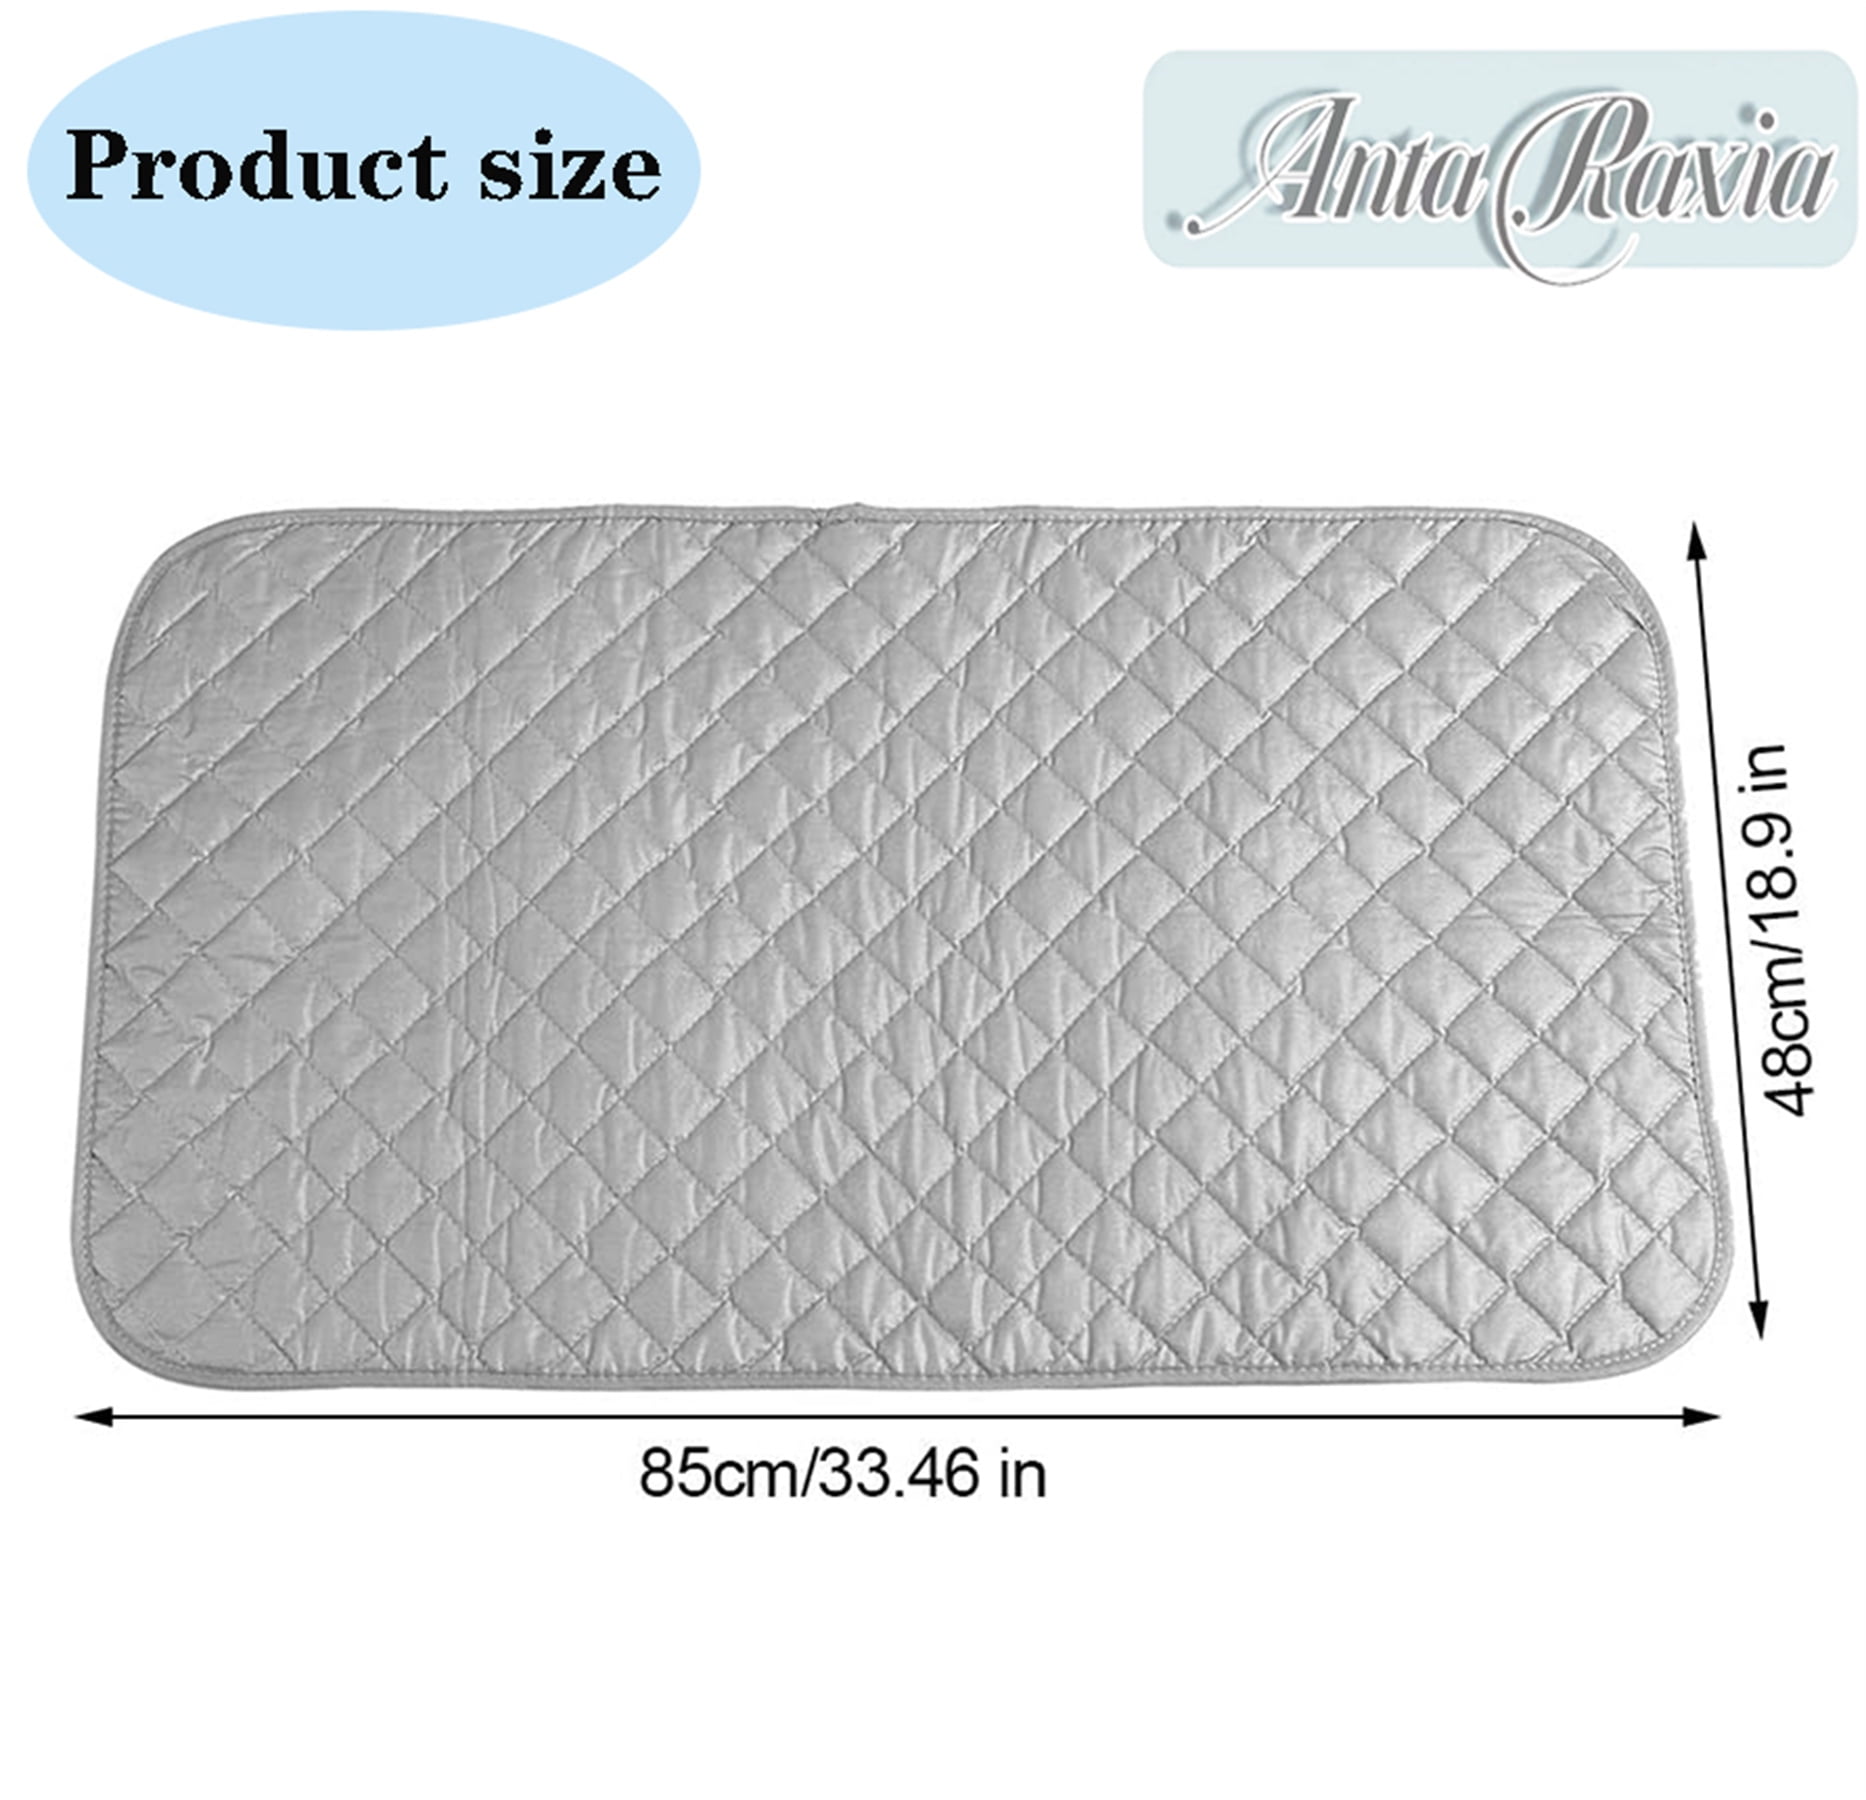 Portable Foldable Ironing Pad Mat 20x25 Inches Grey Heat Resistant Mat 